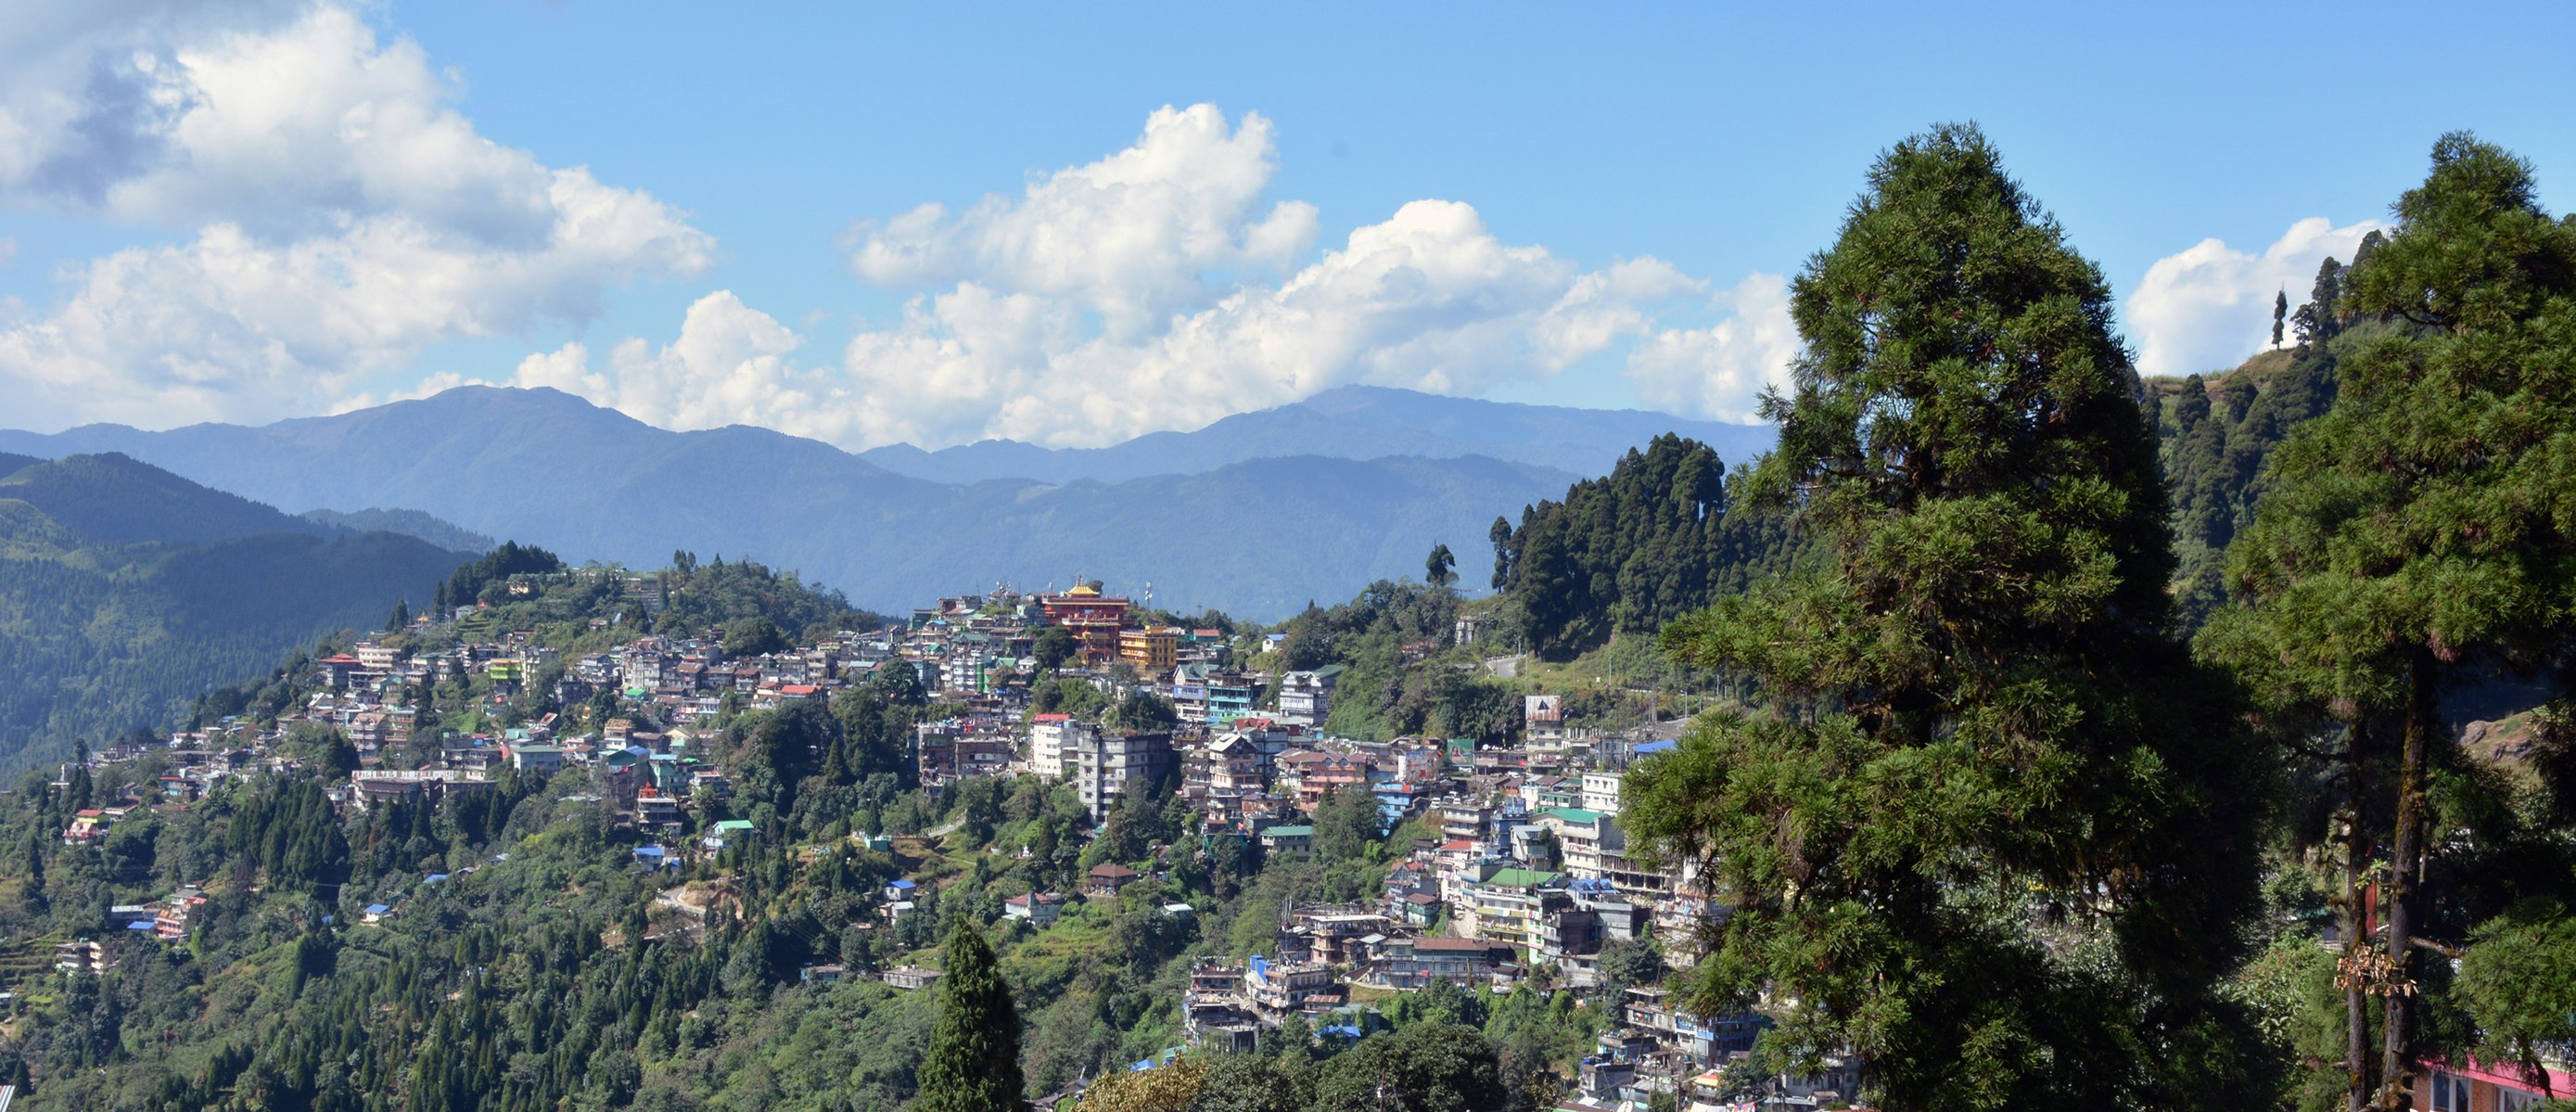 Panoramic Splendour: Jorebunglow, Ghoom, and the Majestic Mountain Landscape as Viewed from Senchal Road